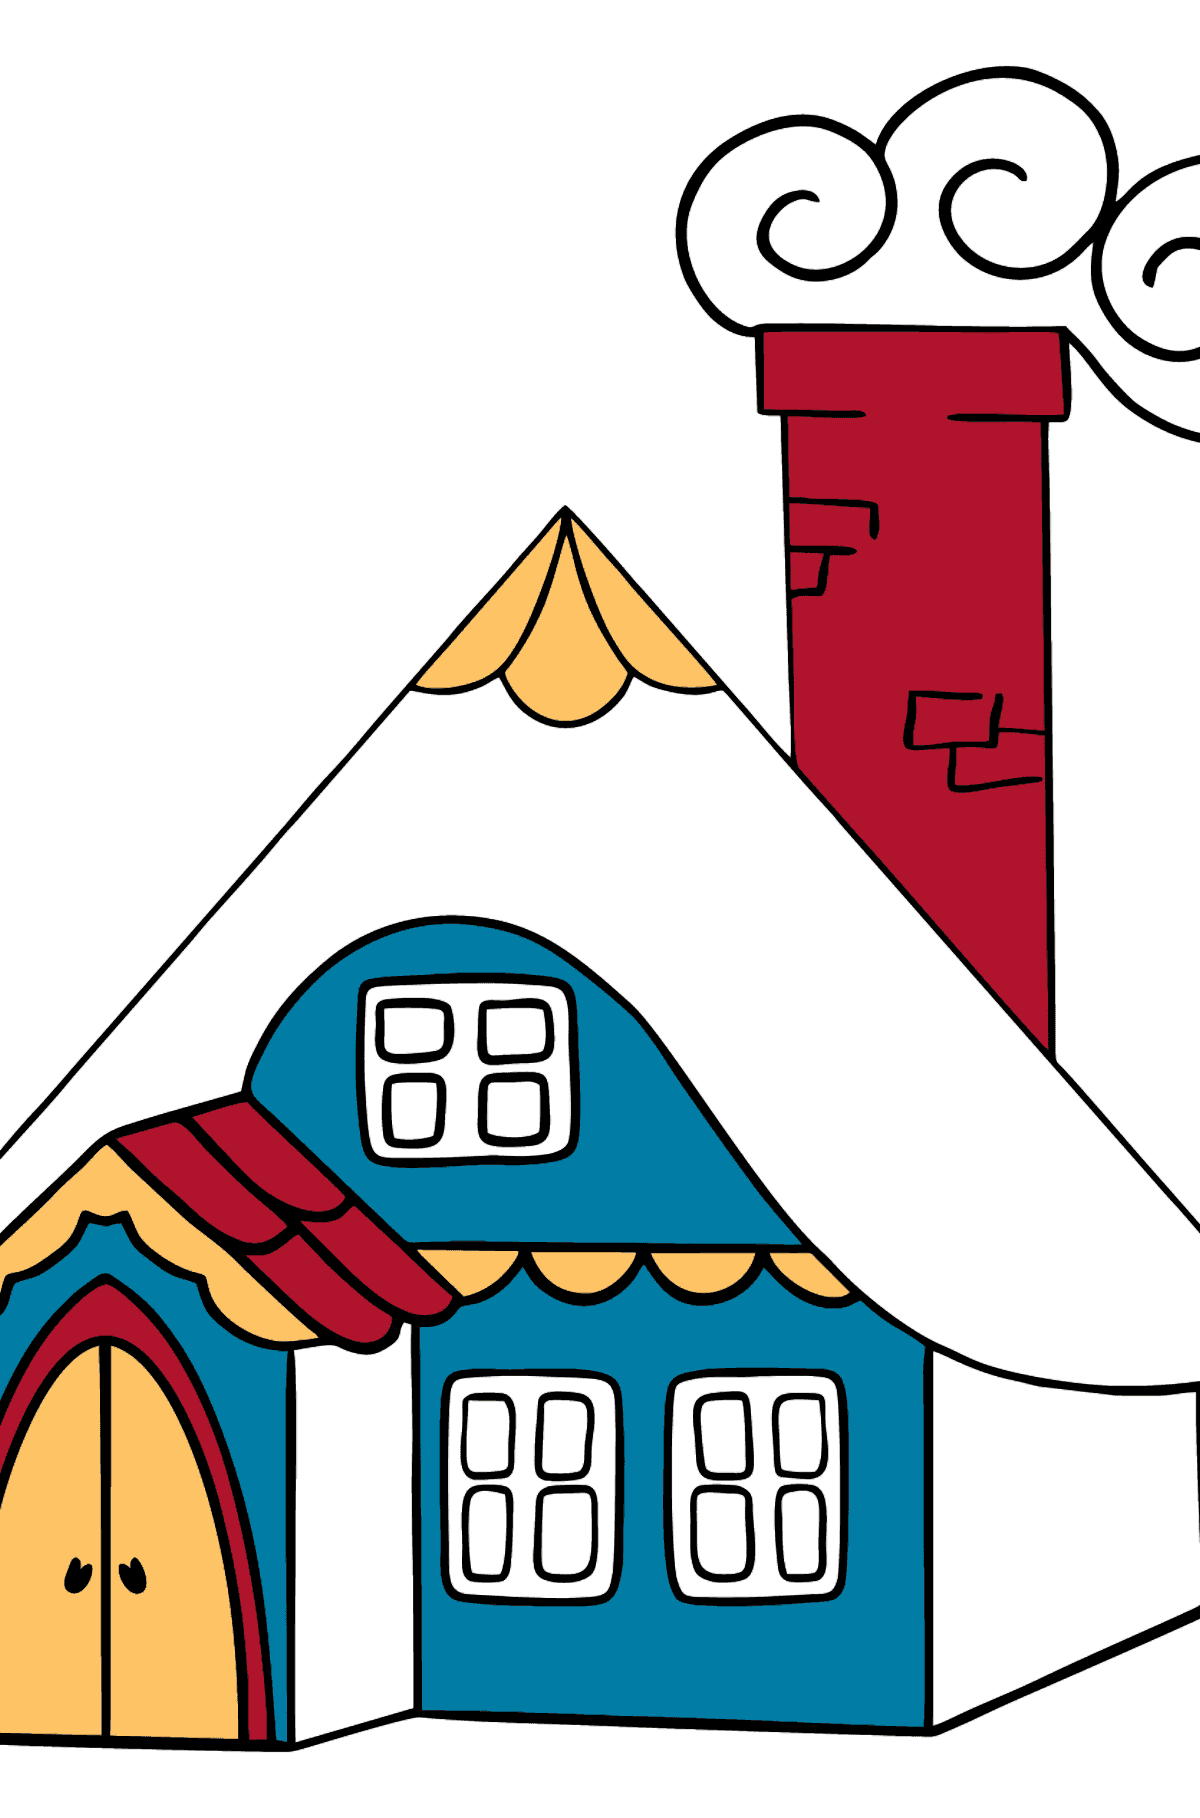 Wonderful House Coloring Page (Easy) - Coloring Pages for Kids